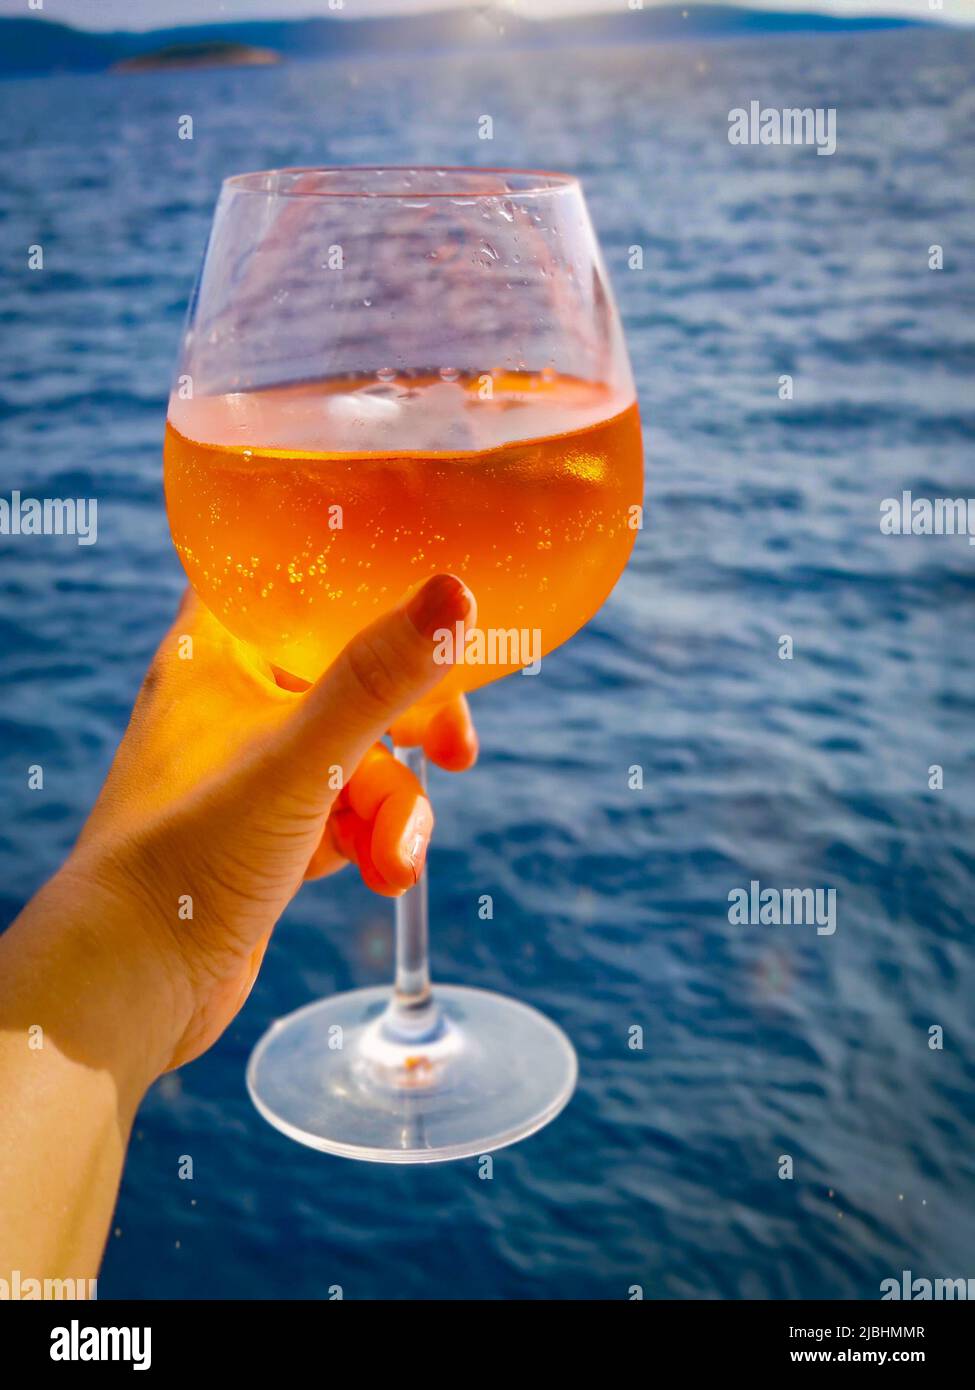 Orange aperol spritz cocktail over the sea on sunset. There is water in the background. Stock Photo